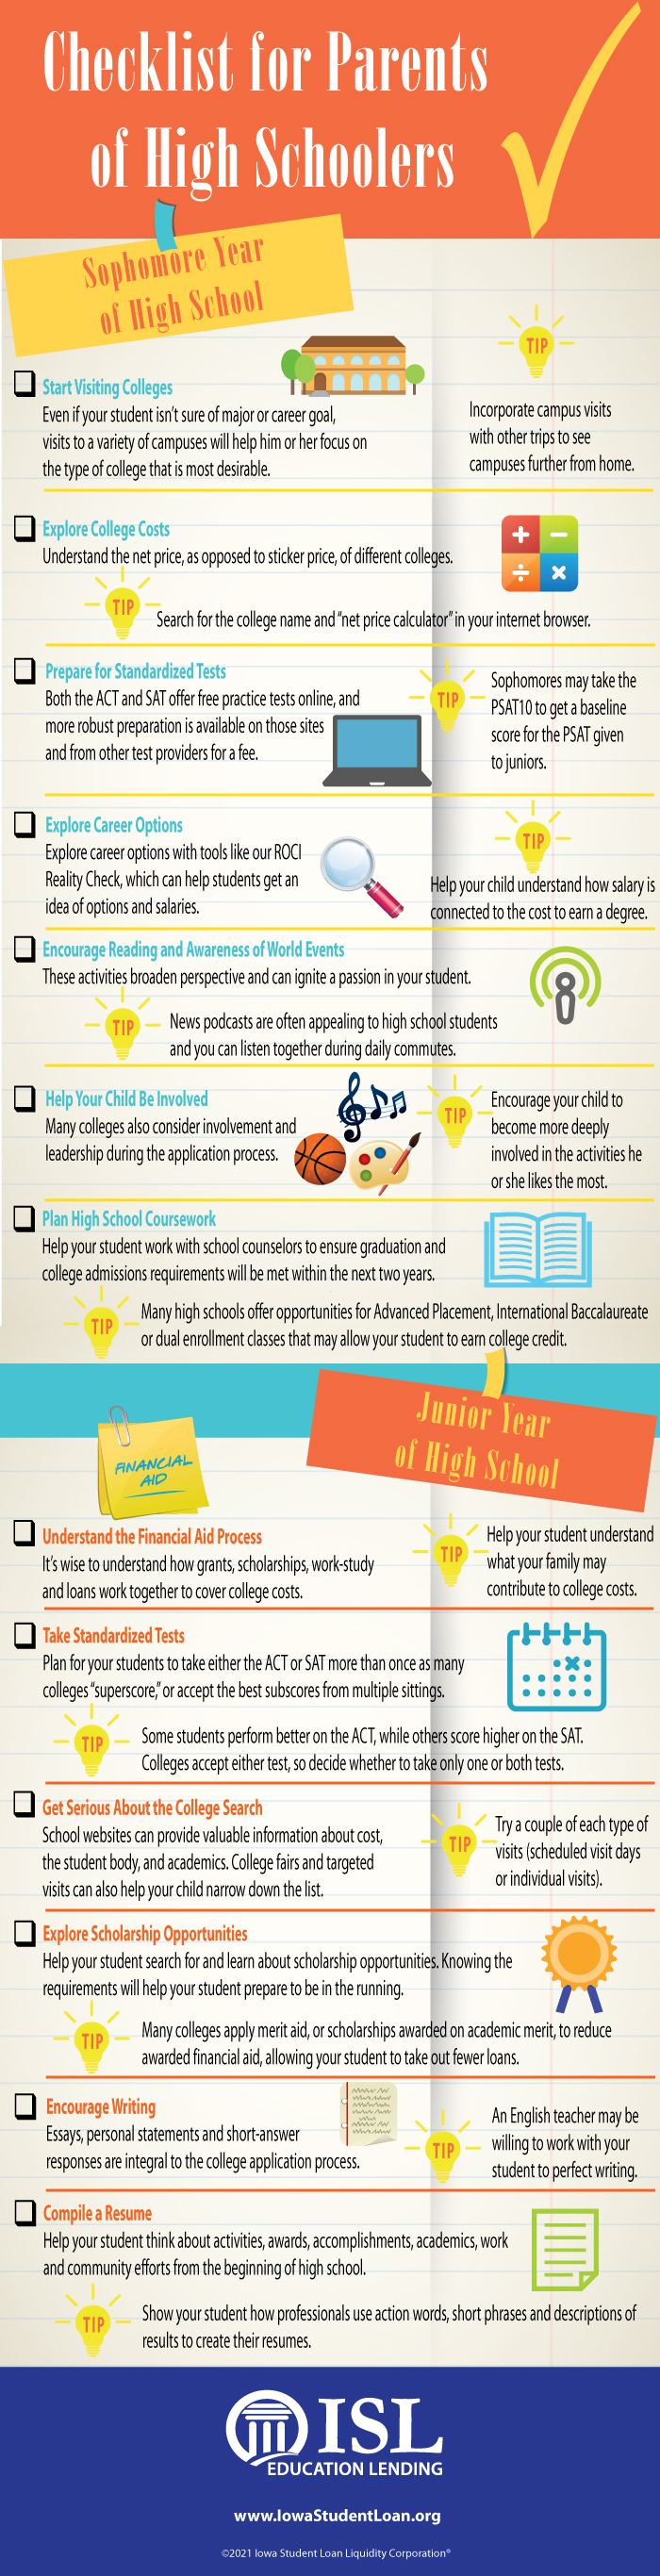 checklist for parents of high schoolers | isl education lending